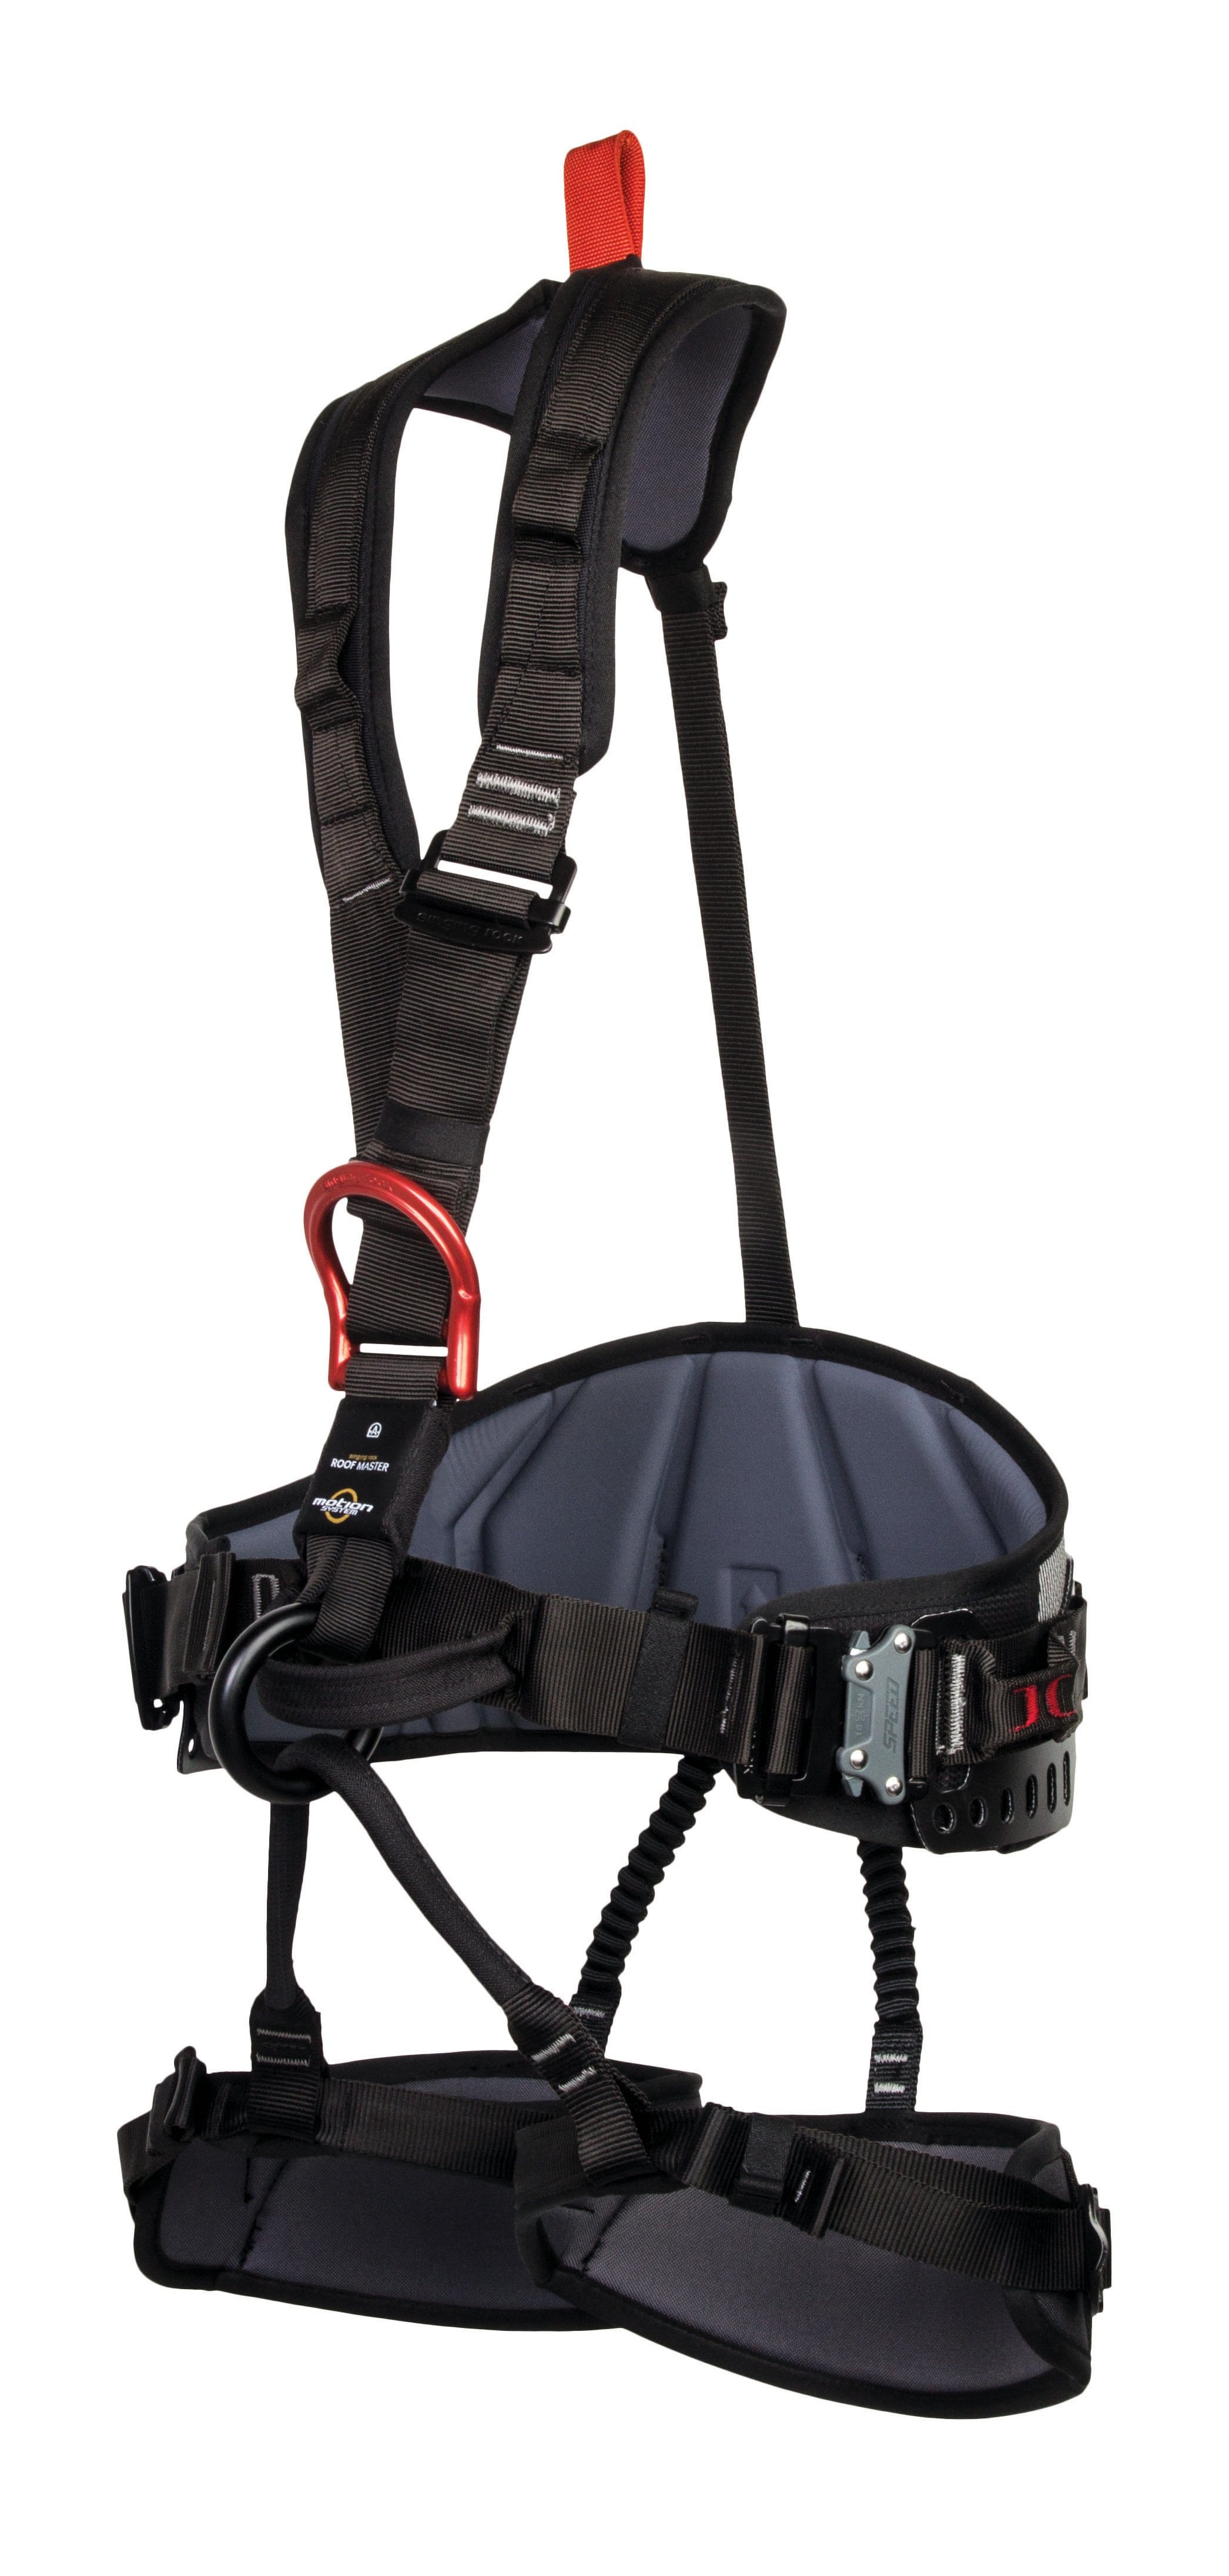 Side View of Singing Rock Roof Master Harness